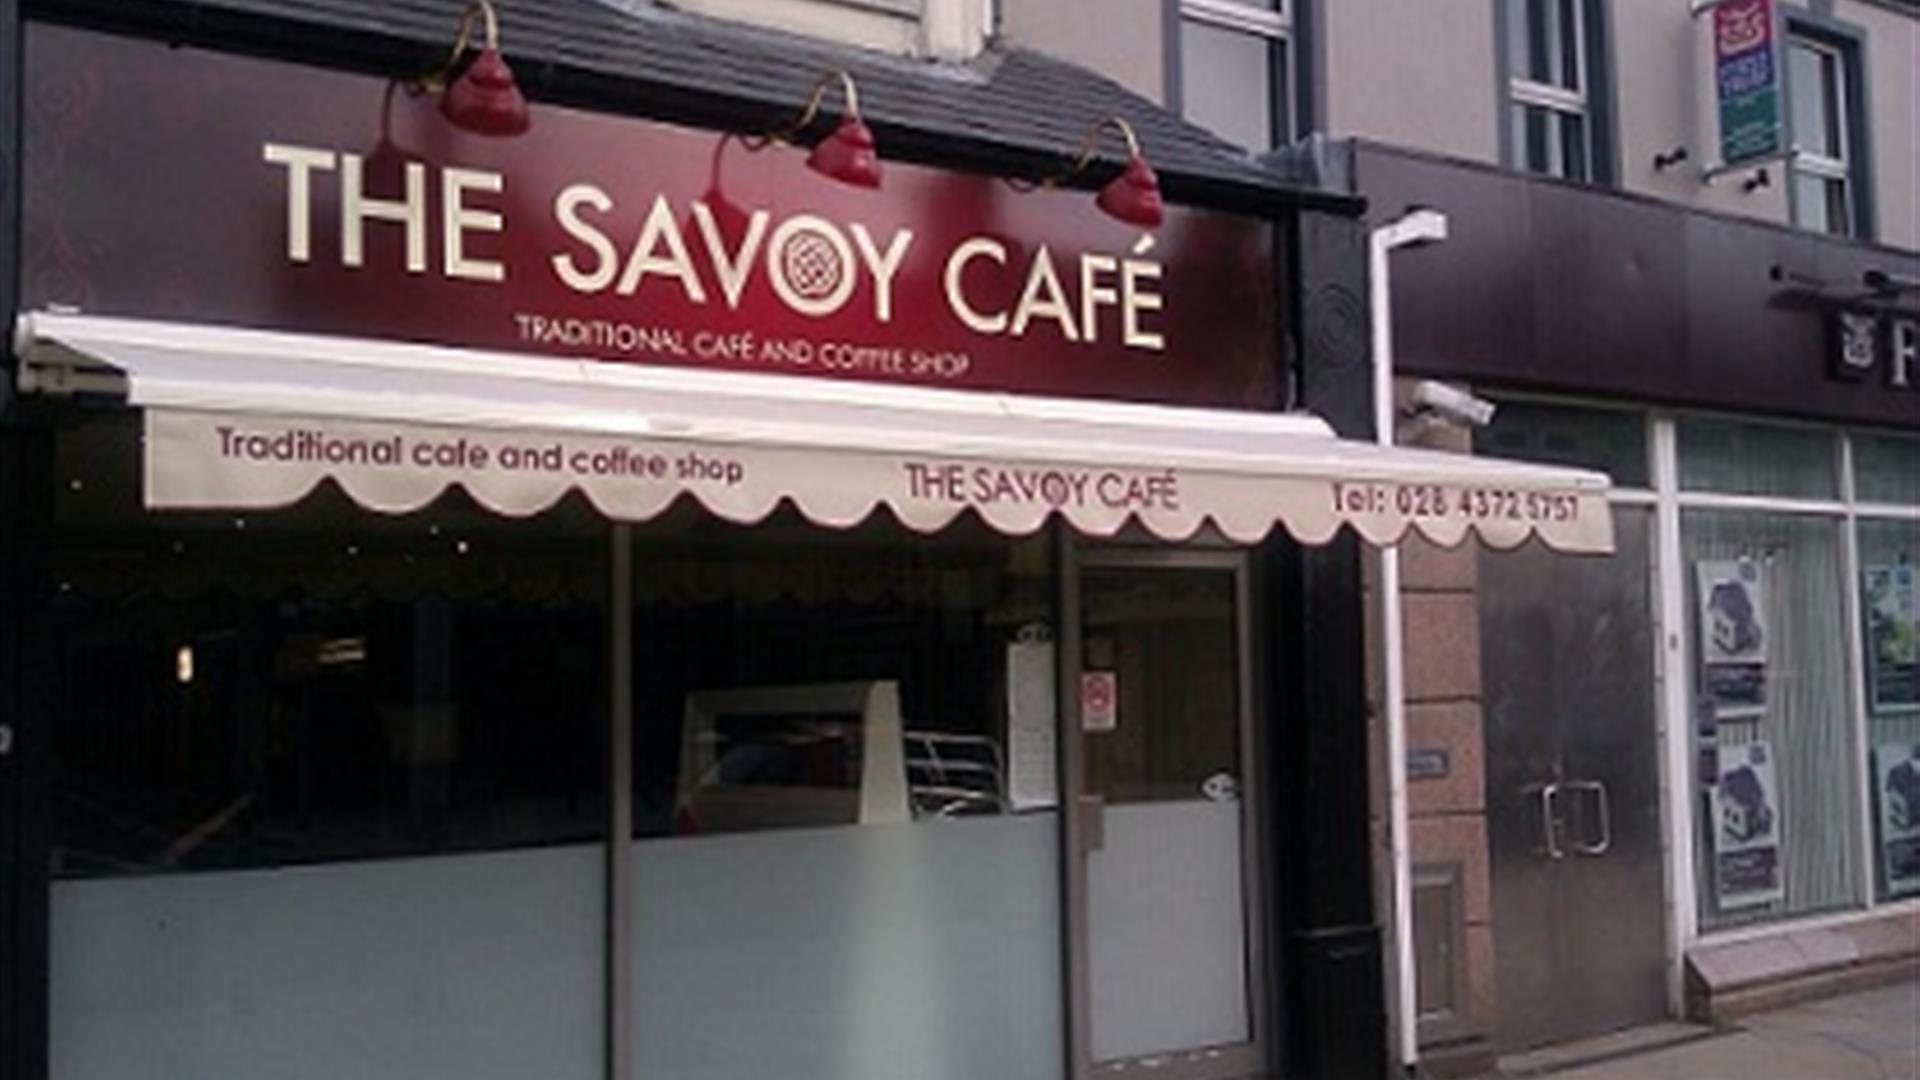 An image of the front of The Savoy Cafe, Newcastle Co Down